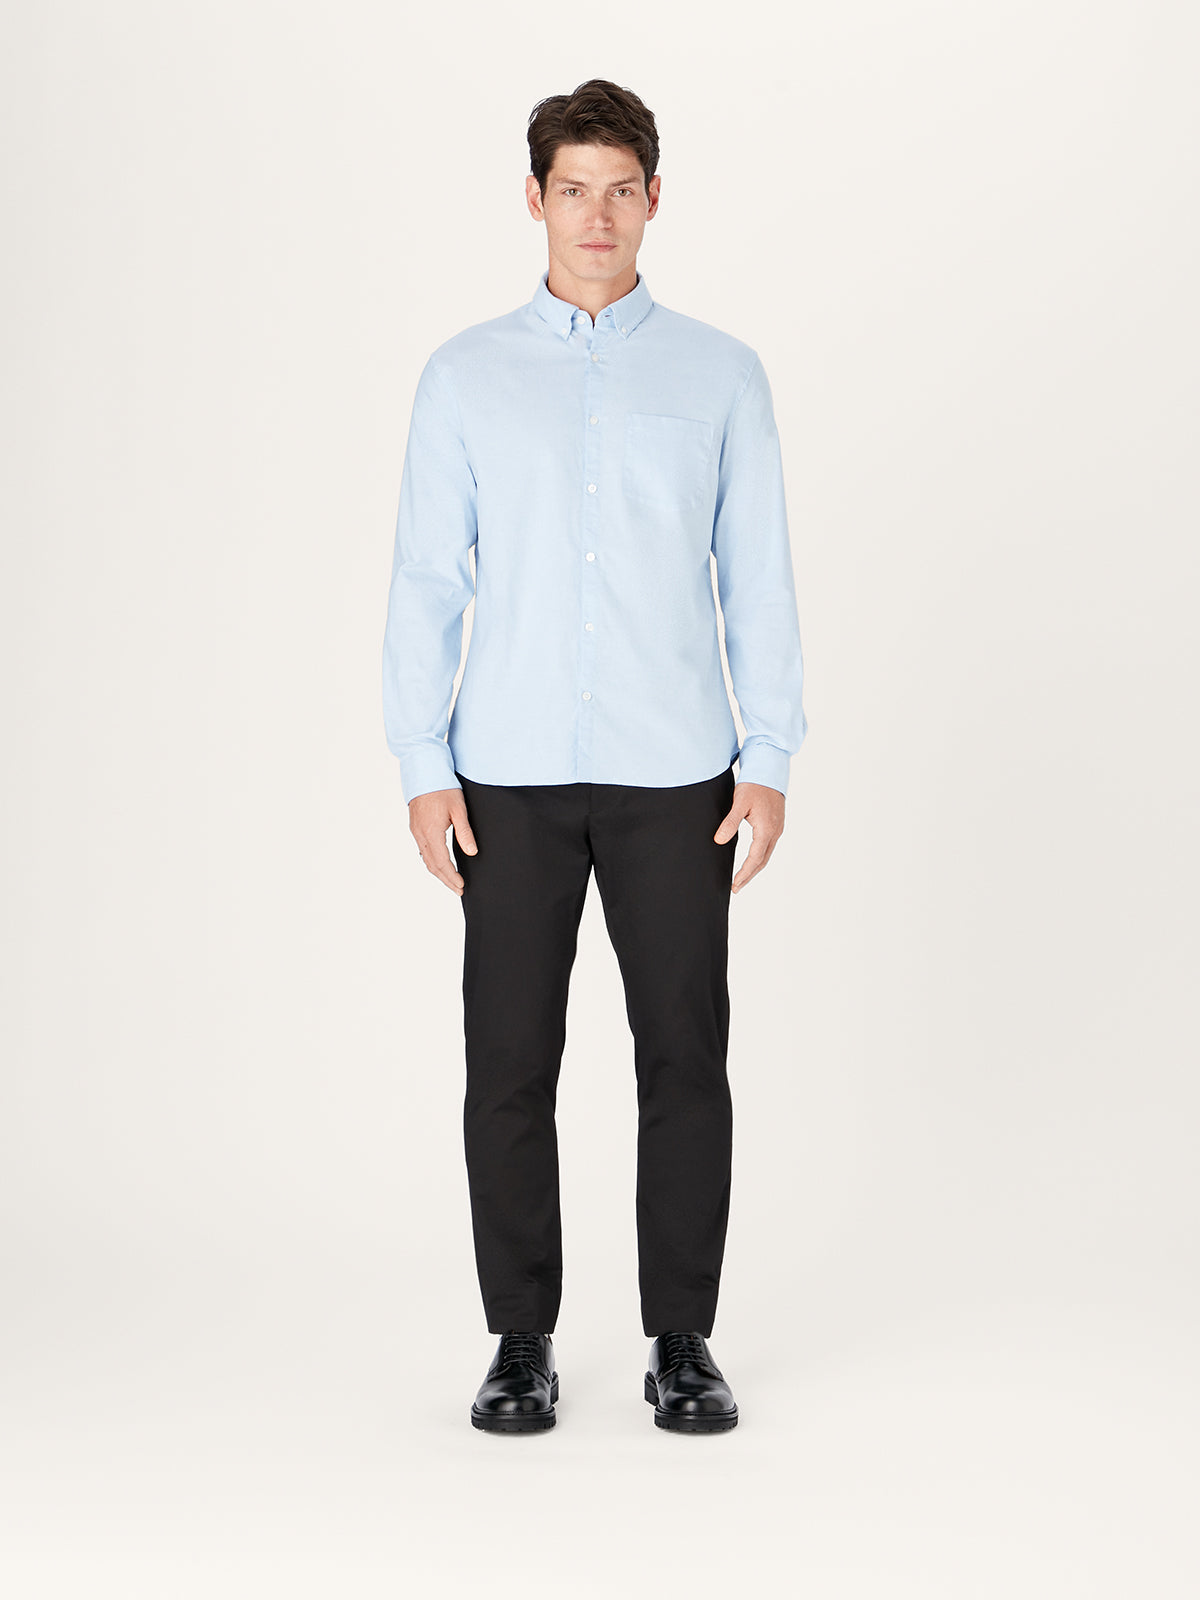 The All Day Oxford Shirt